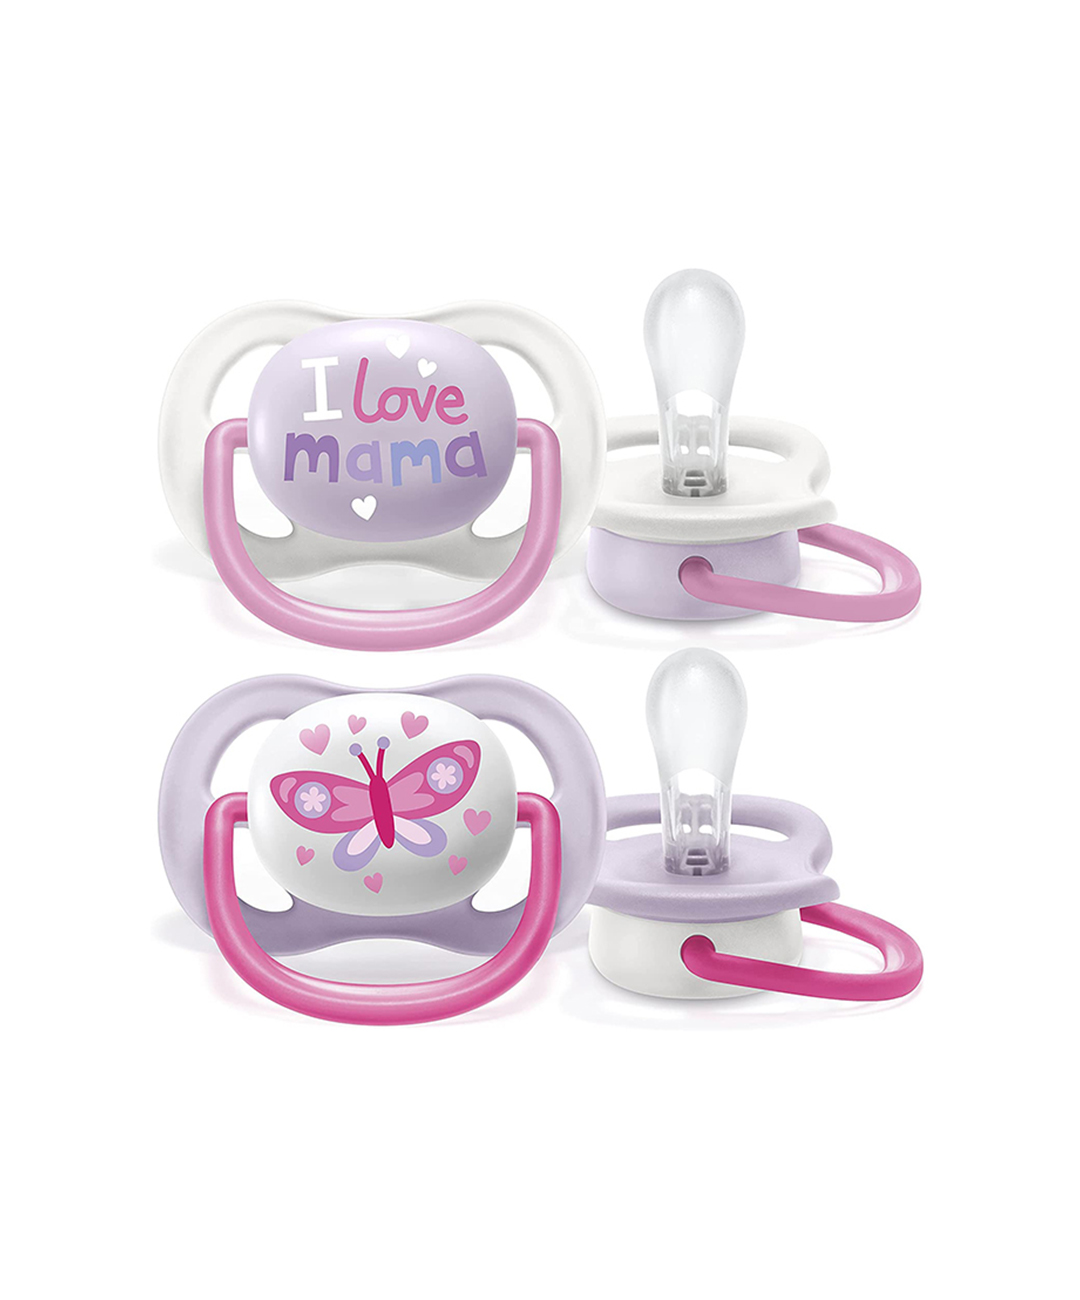 AVENT SUCETTE B/2 ULTRA AIR HAPPY 6-18M